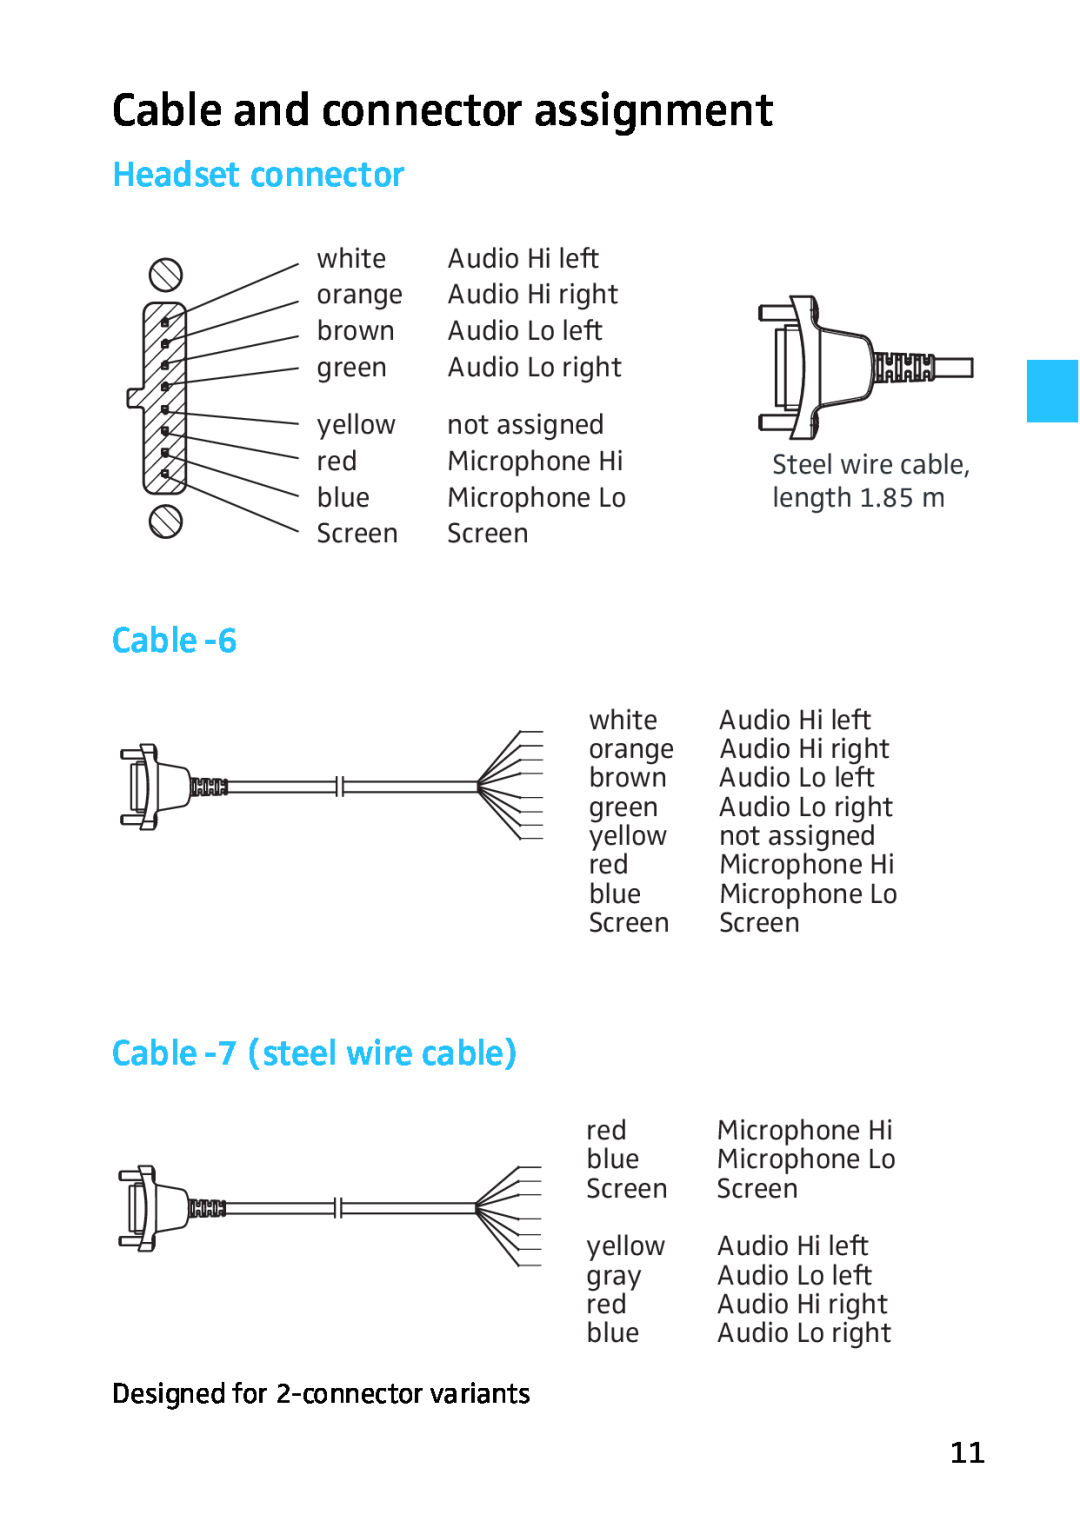 Sennheiser HMD 46, HME 46 manual Cable and connector assignment, Headset connector, Cable -7steel wire cable, length 1.85 m 